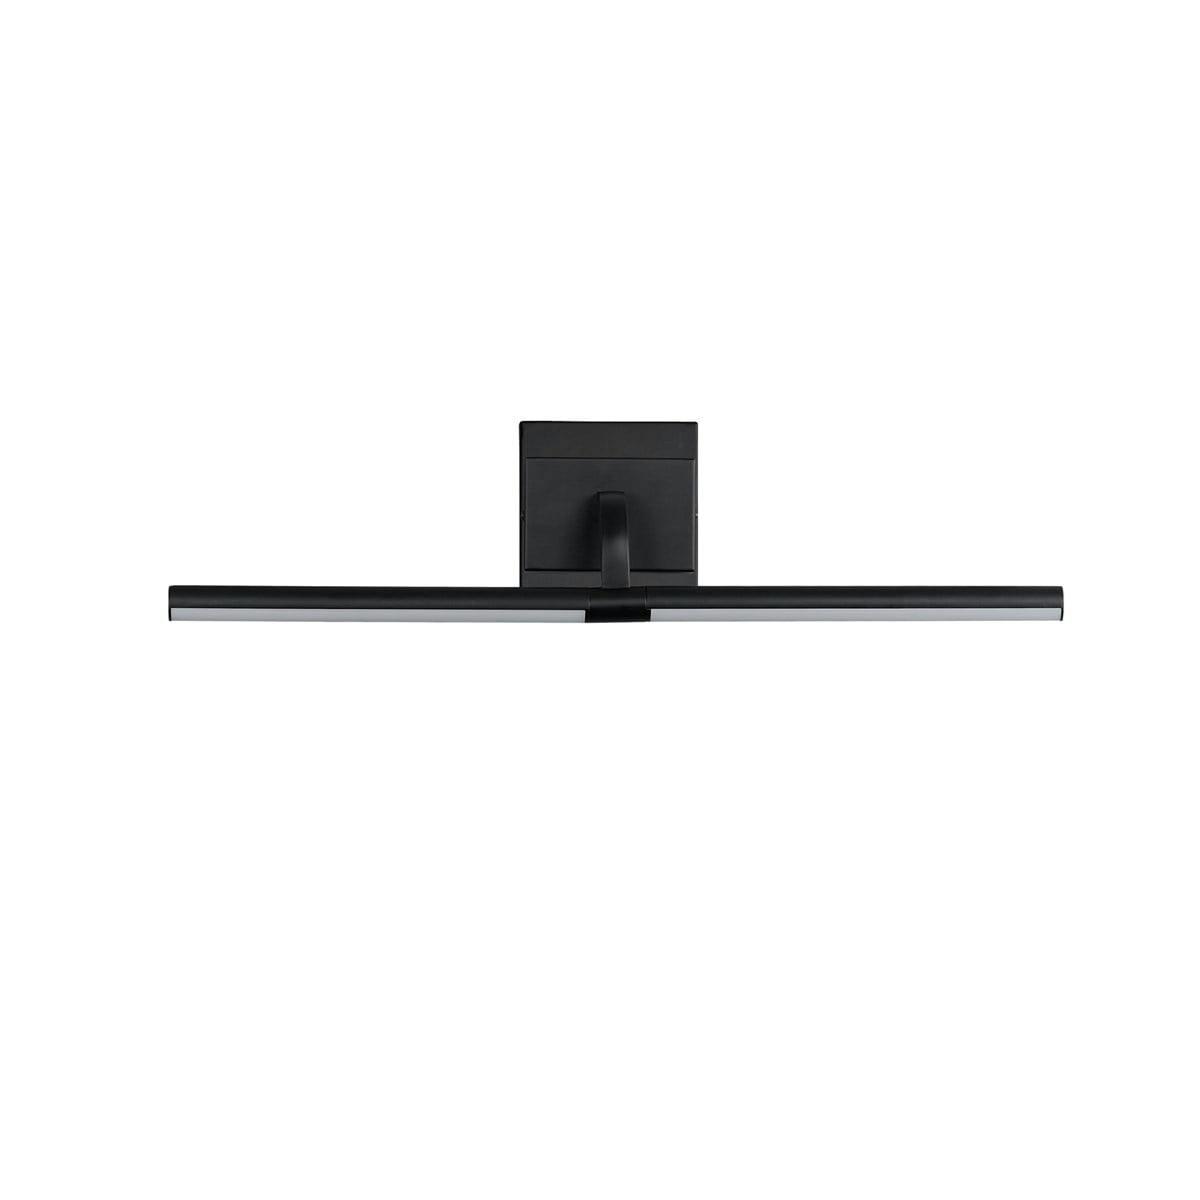 Mona Single Light Dimmable LED Armed Sconce